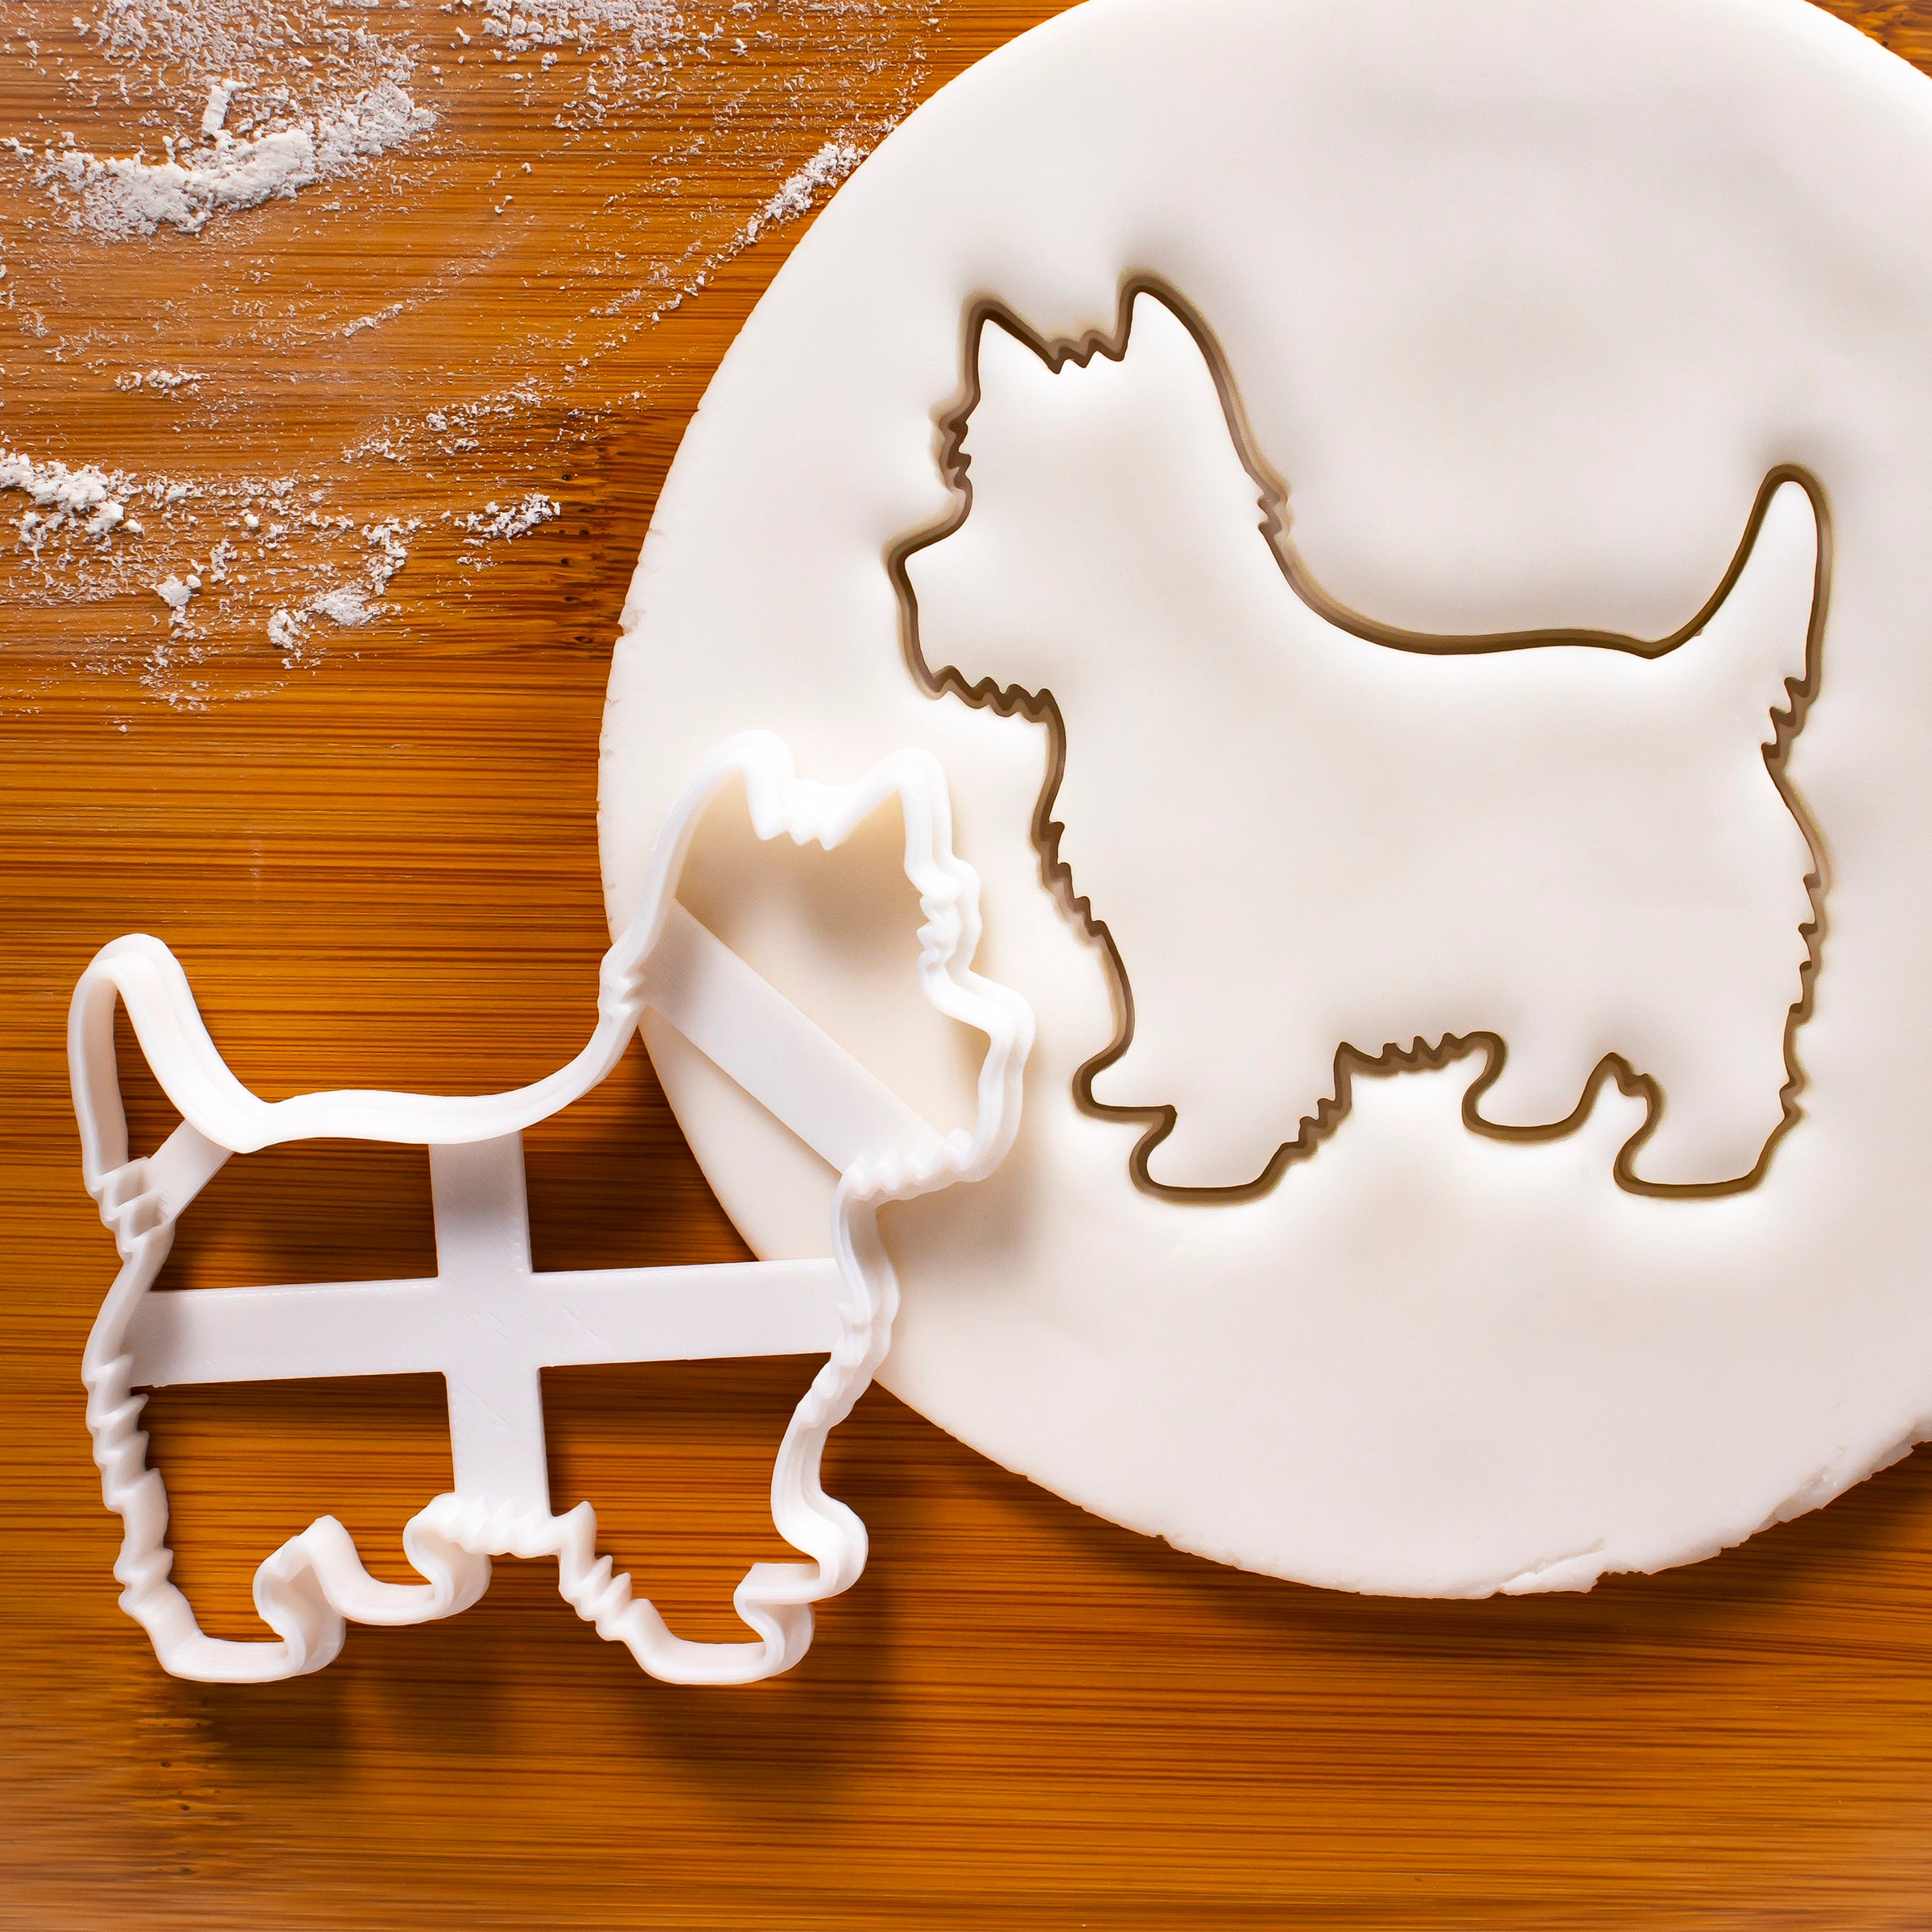 West Highland White Terrier Dog Silhouette cookie cutter